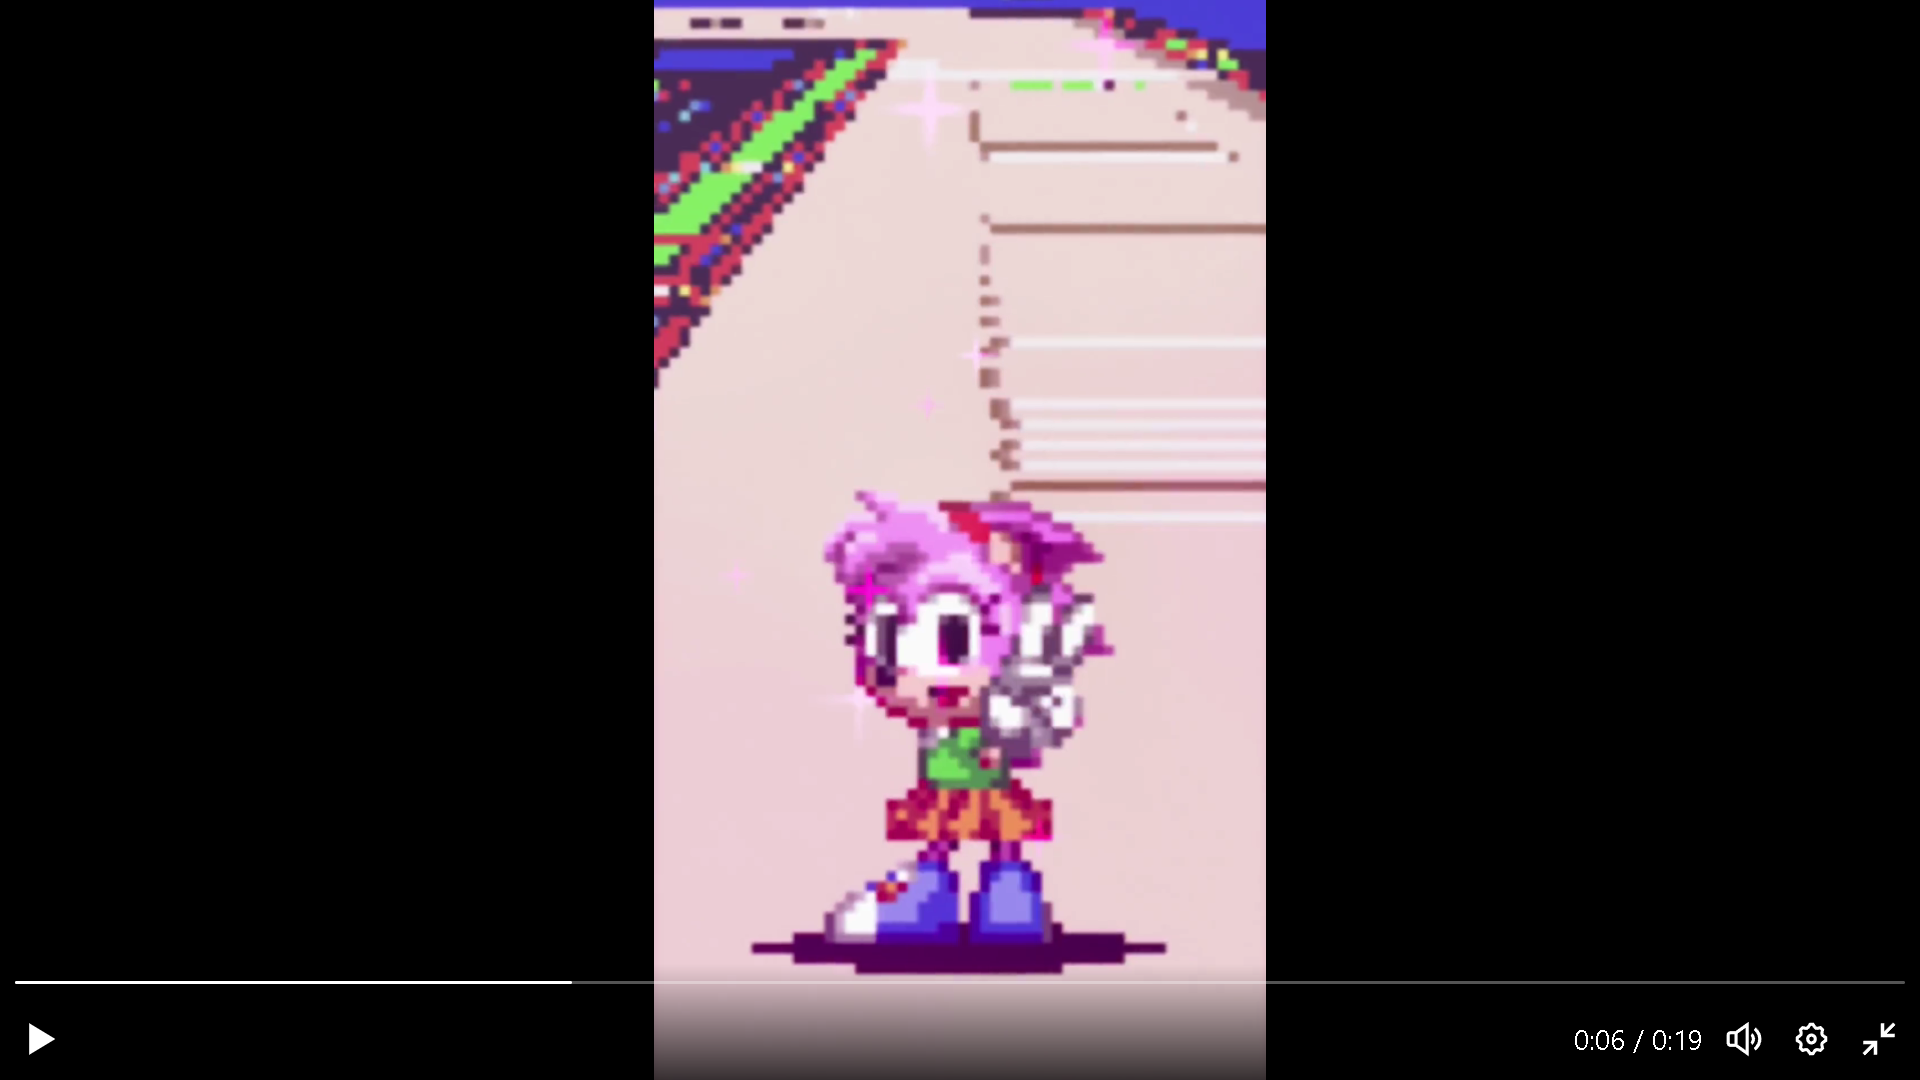 Playable Amy is great, but Sonic Origins Plus is pointless if it